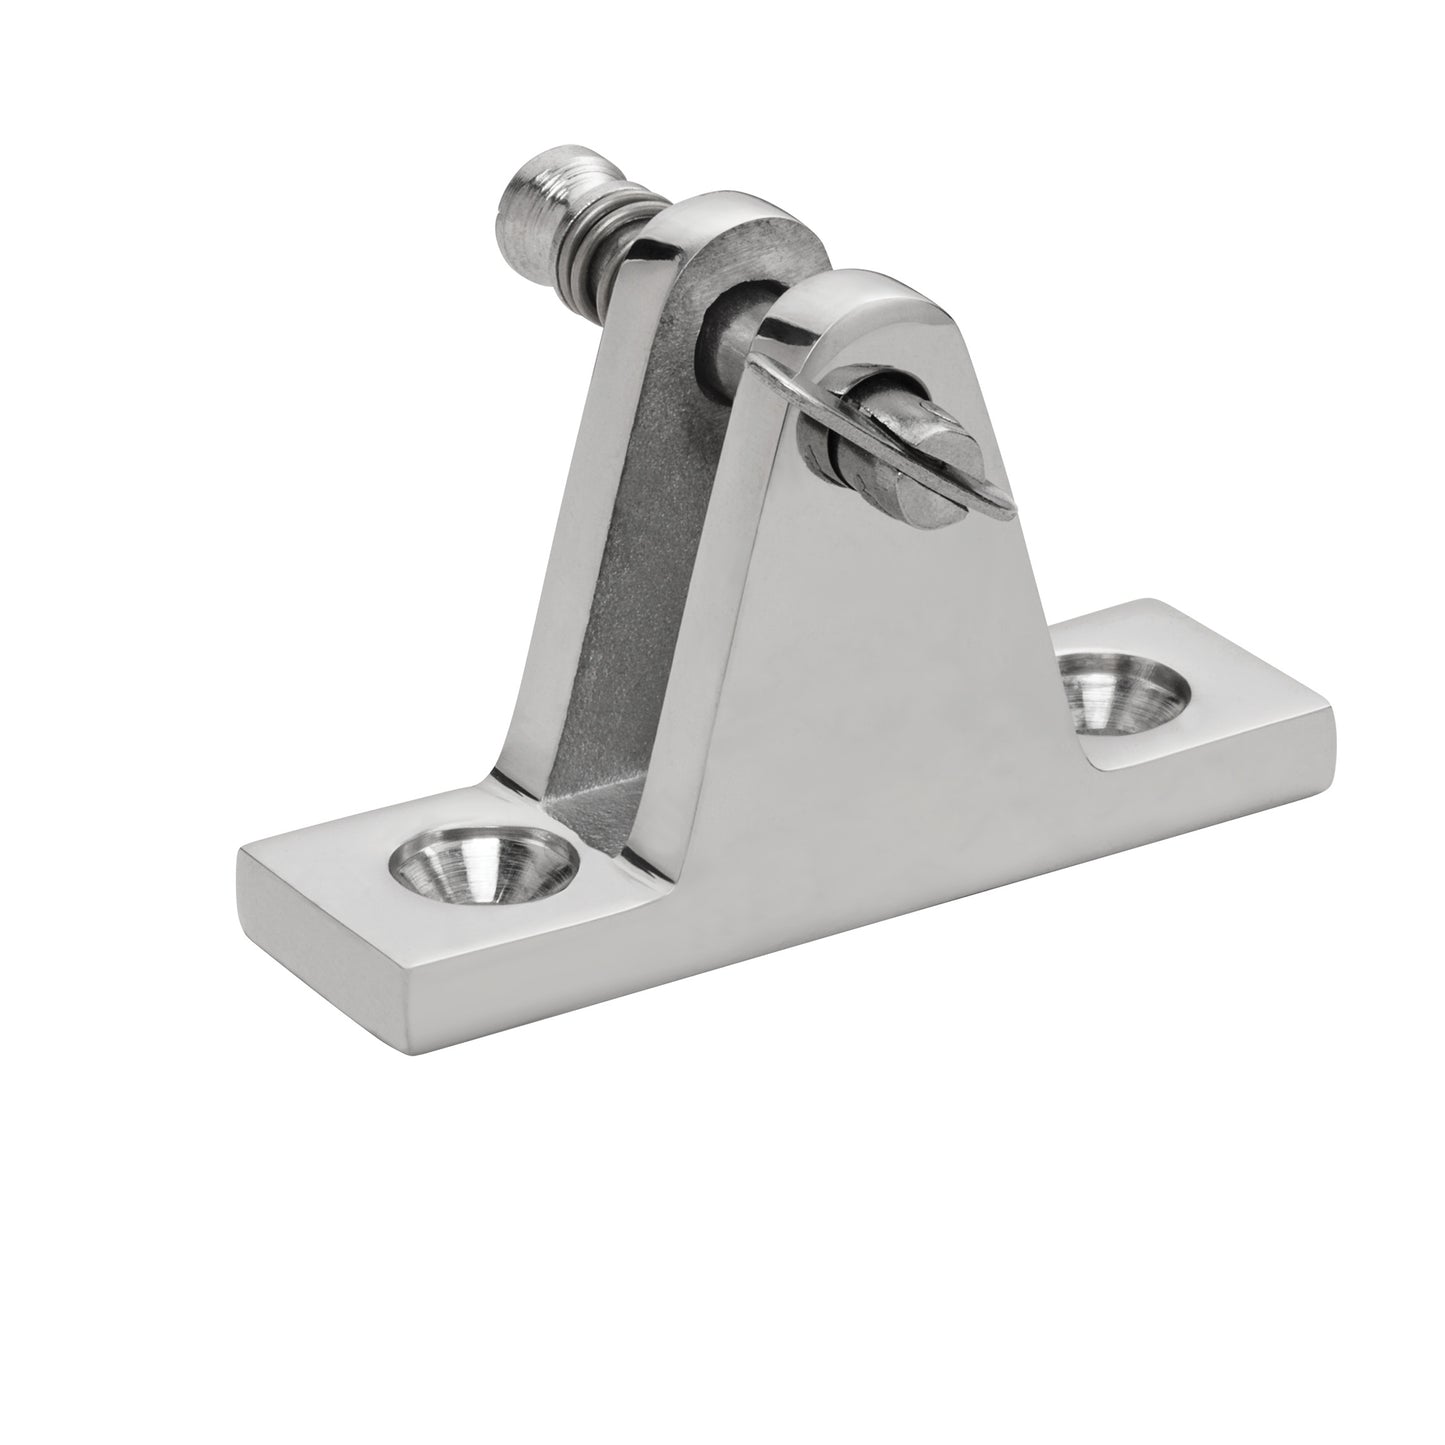 90° Deck Hinge with Removable Pin